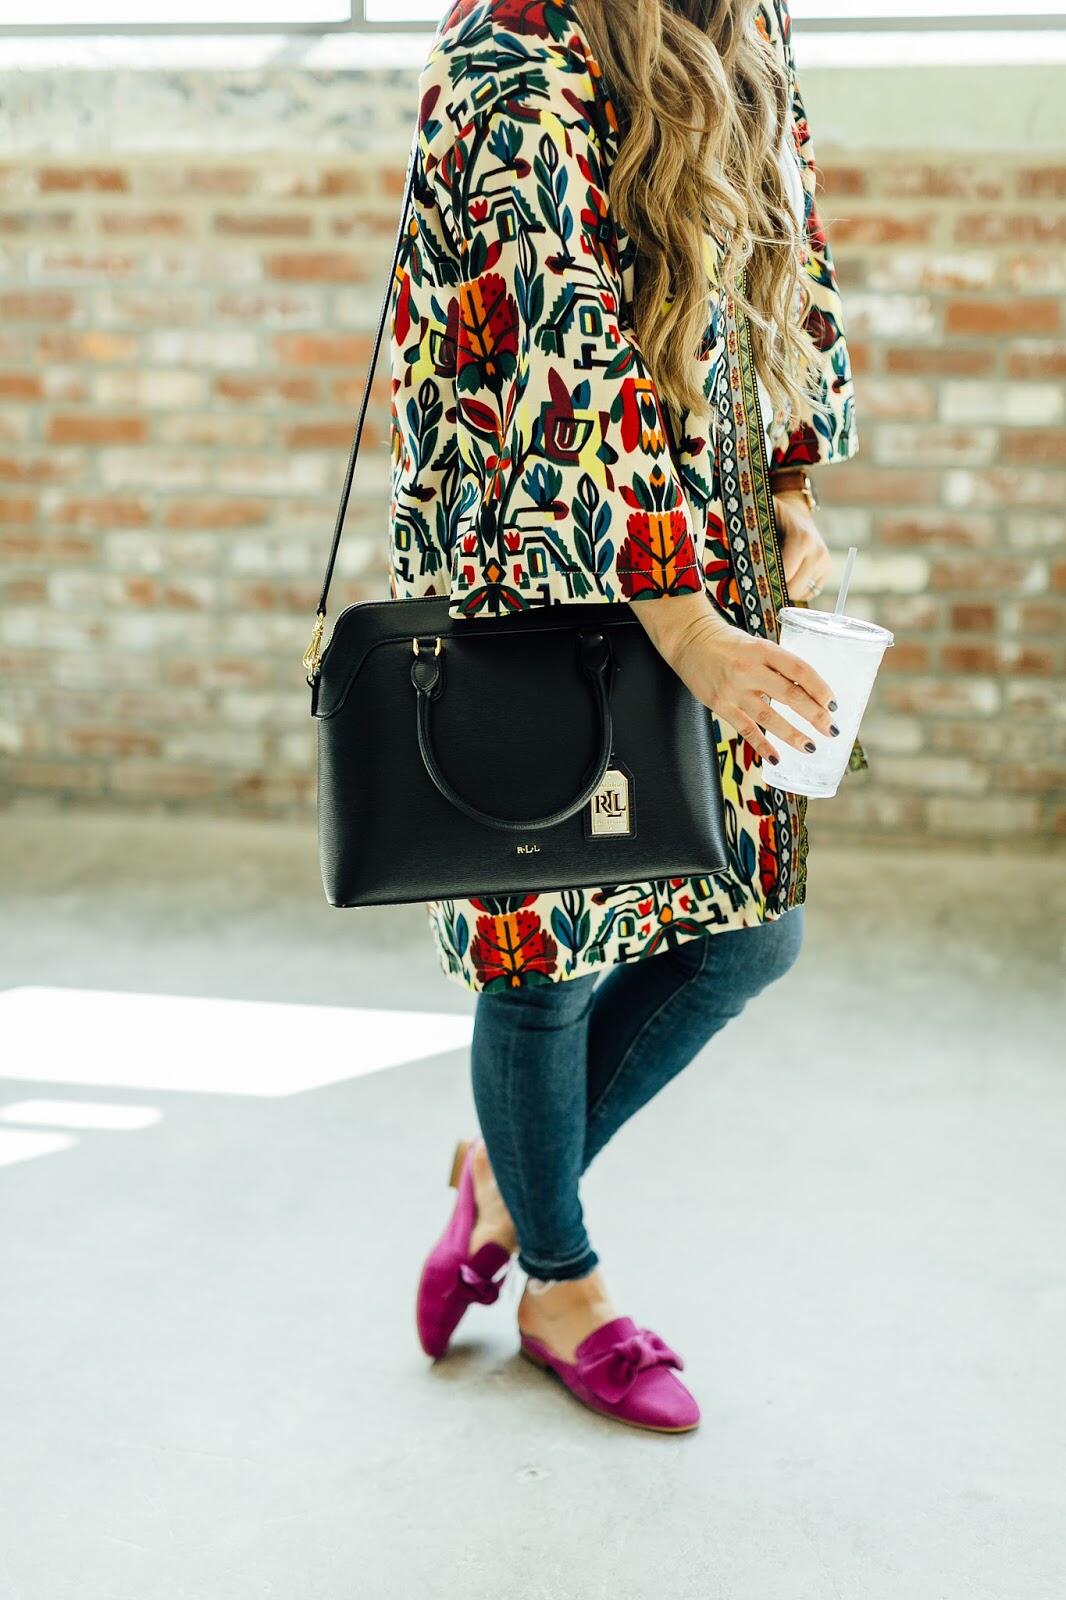 2 Ways to Wear Mules this Fall by East Memphis fashion blogger Walking in Memphis in High Heels